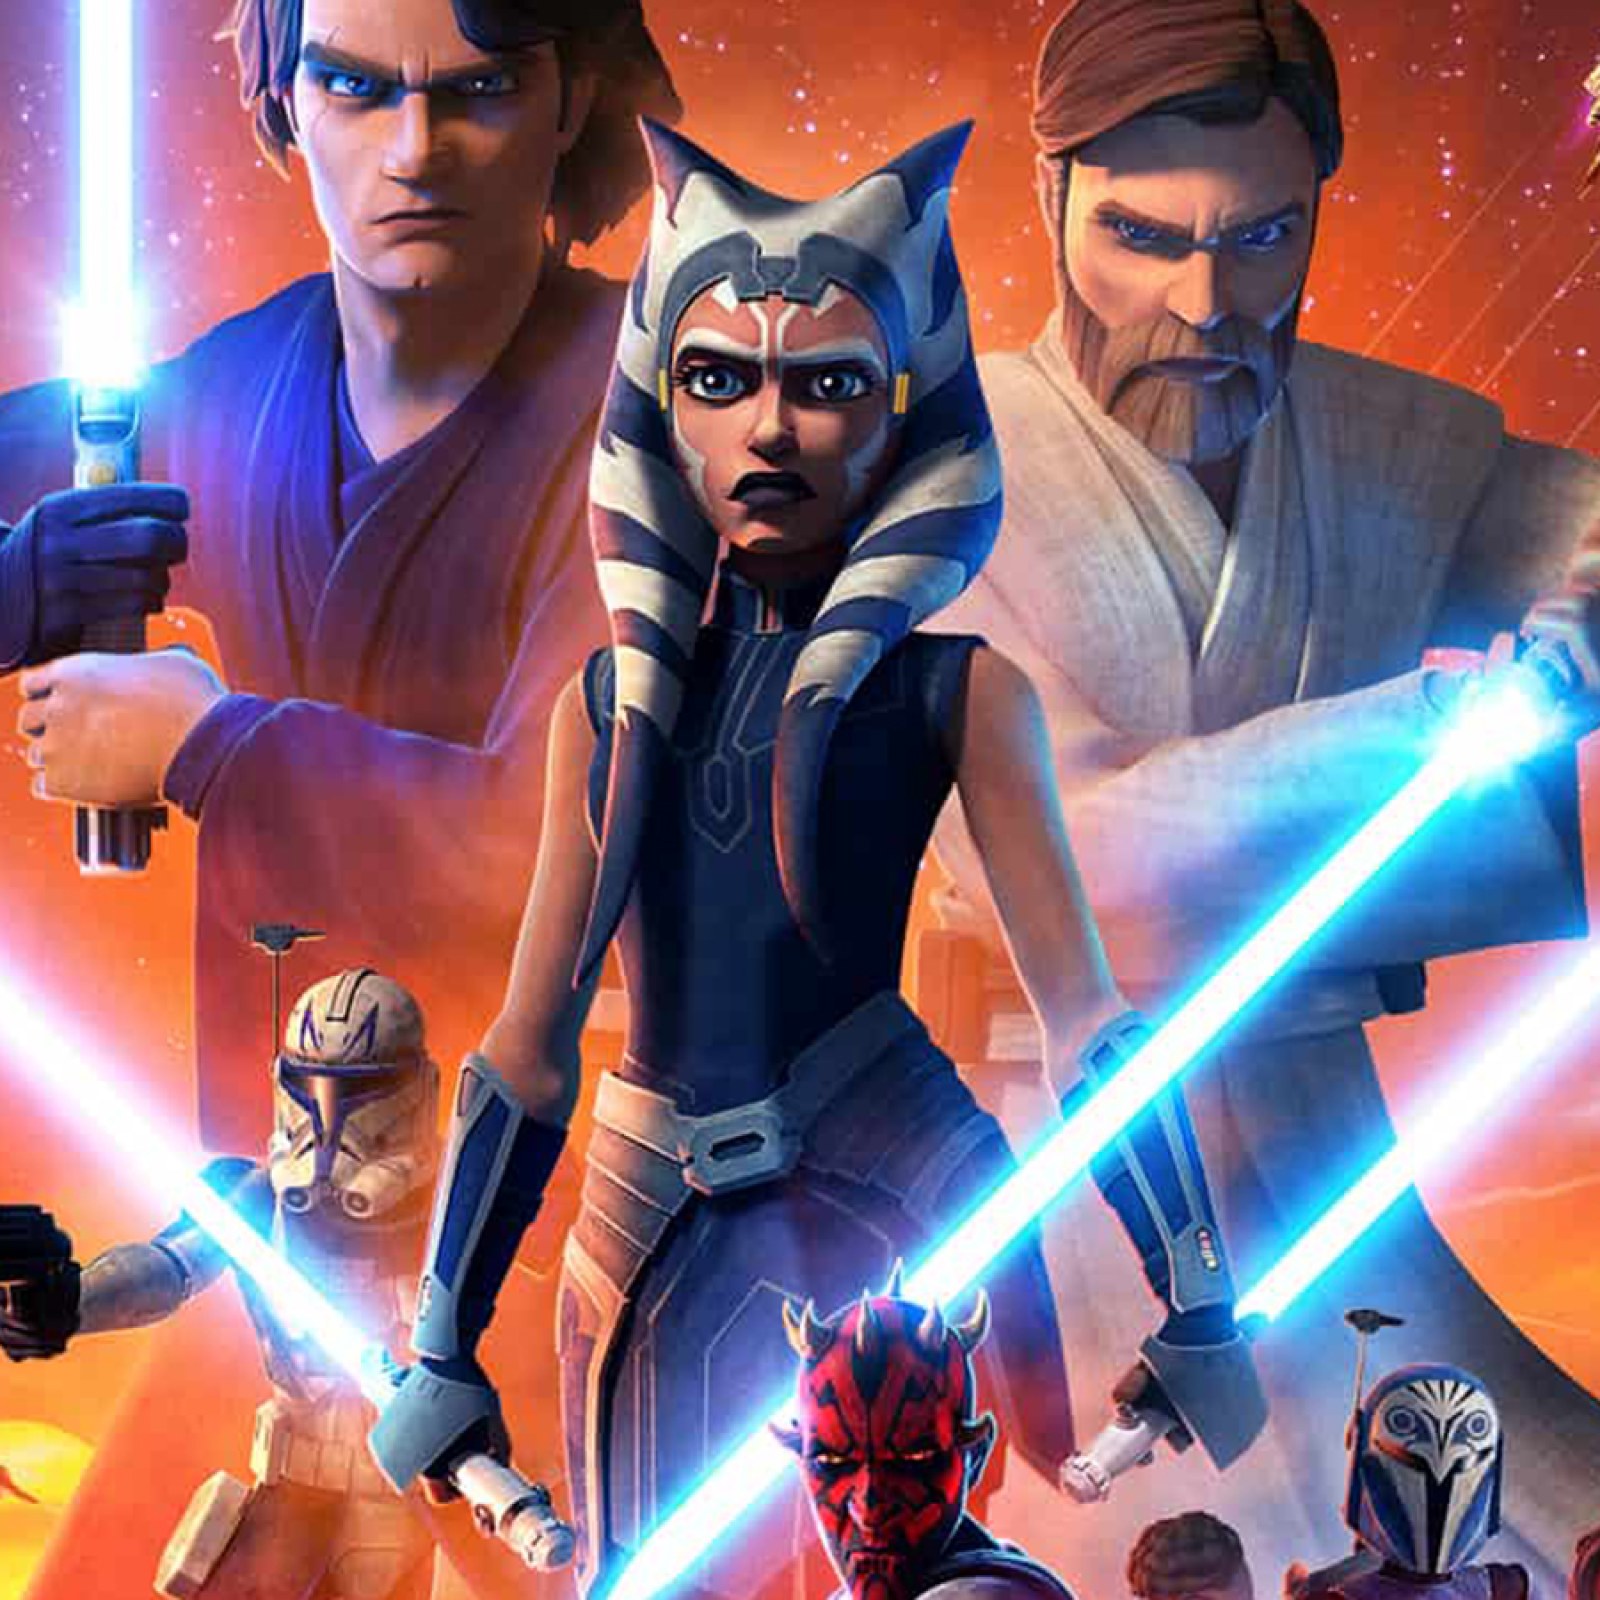 Star Wars The Clone Wars Season 7 Disney Plus Release Date When Does The Next Episode Come Out